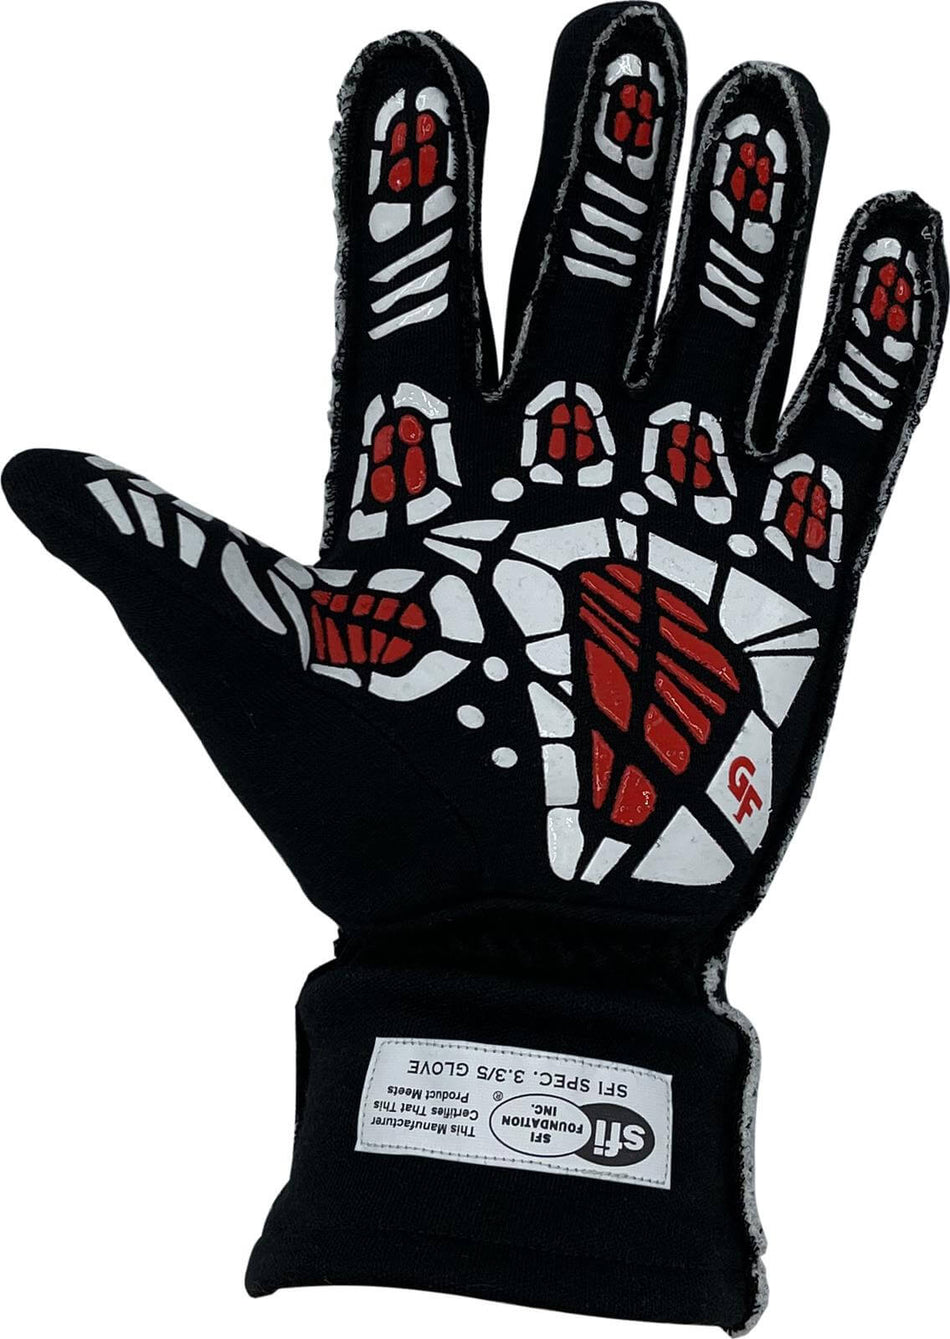 G-Limit RS Racing Gloves - $89.00